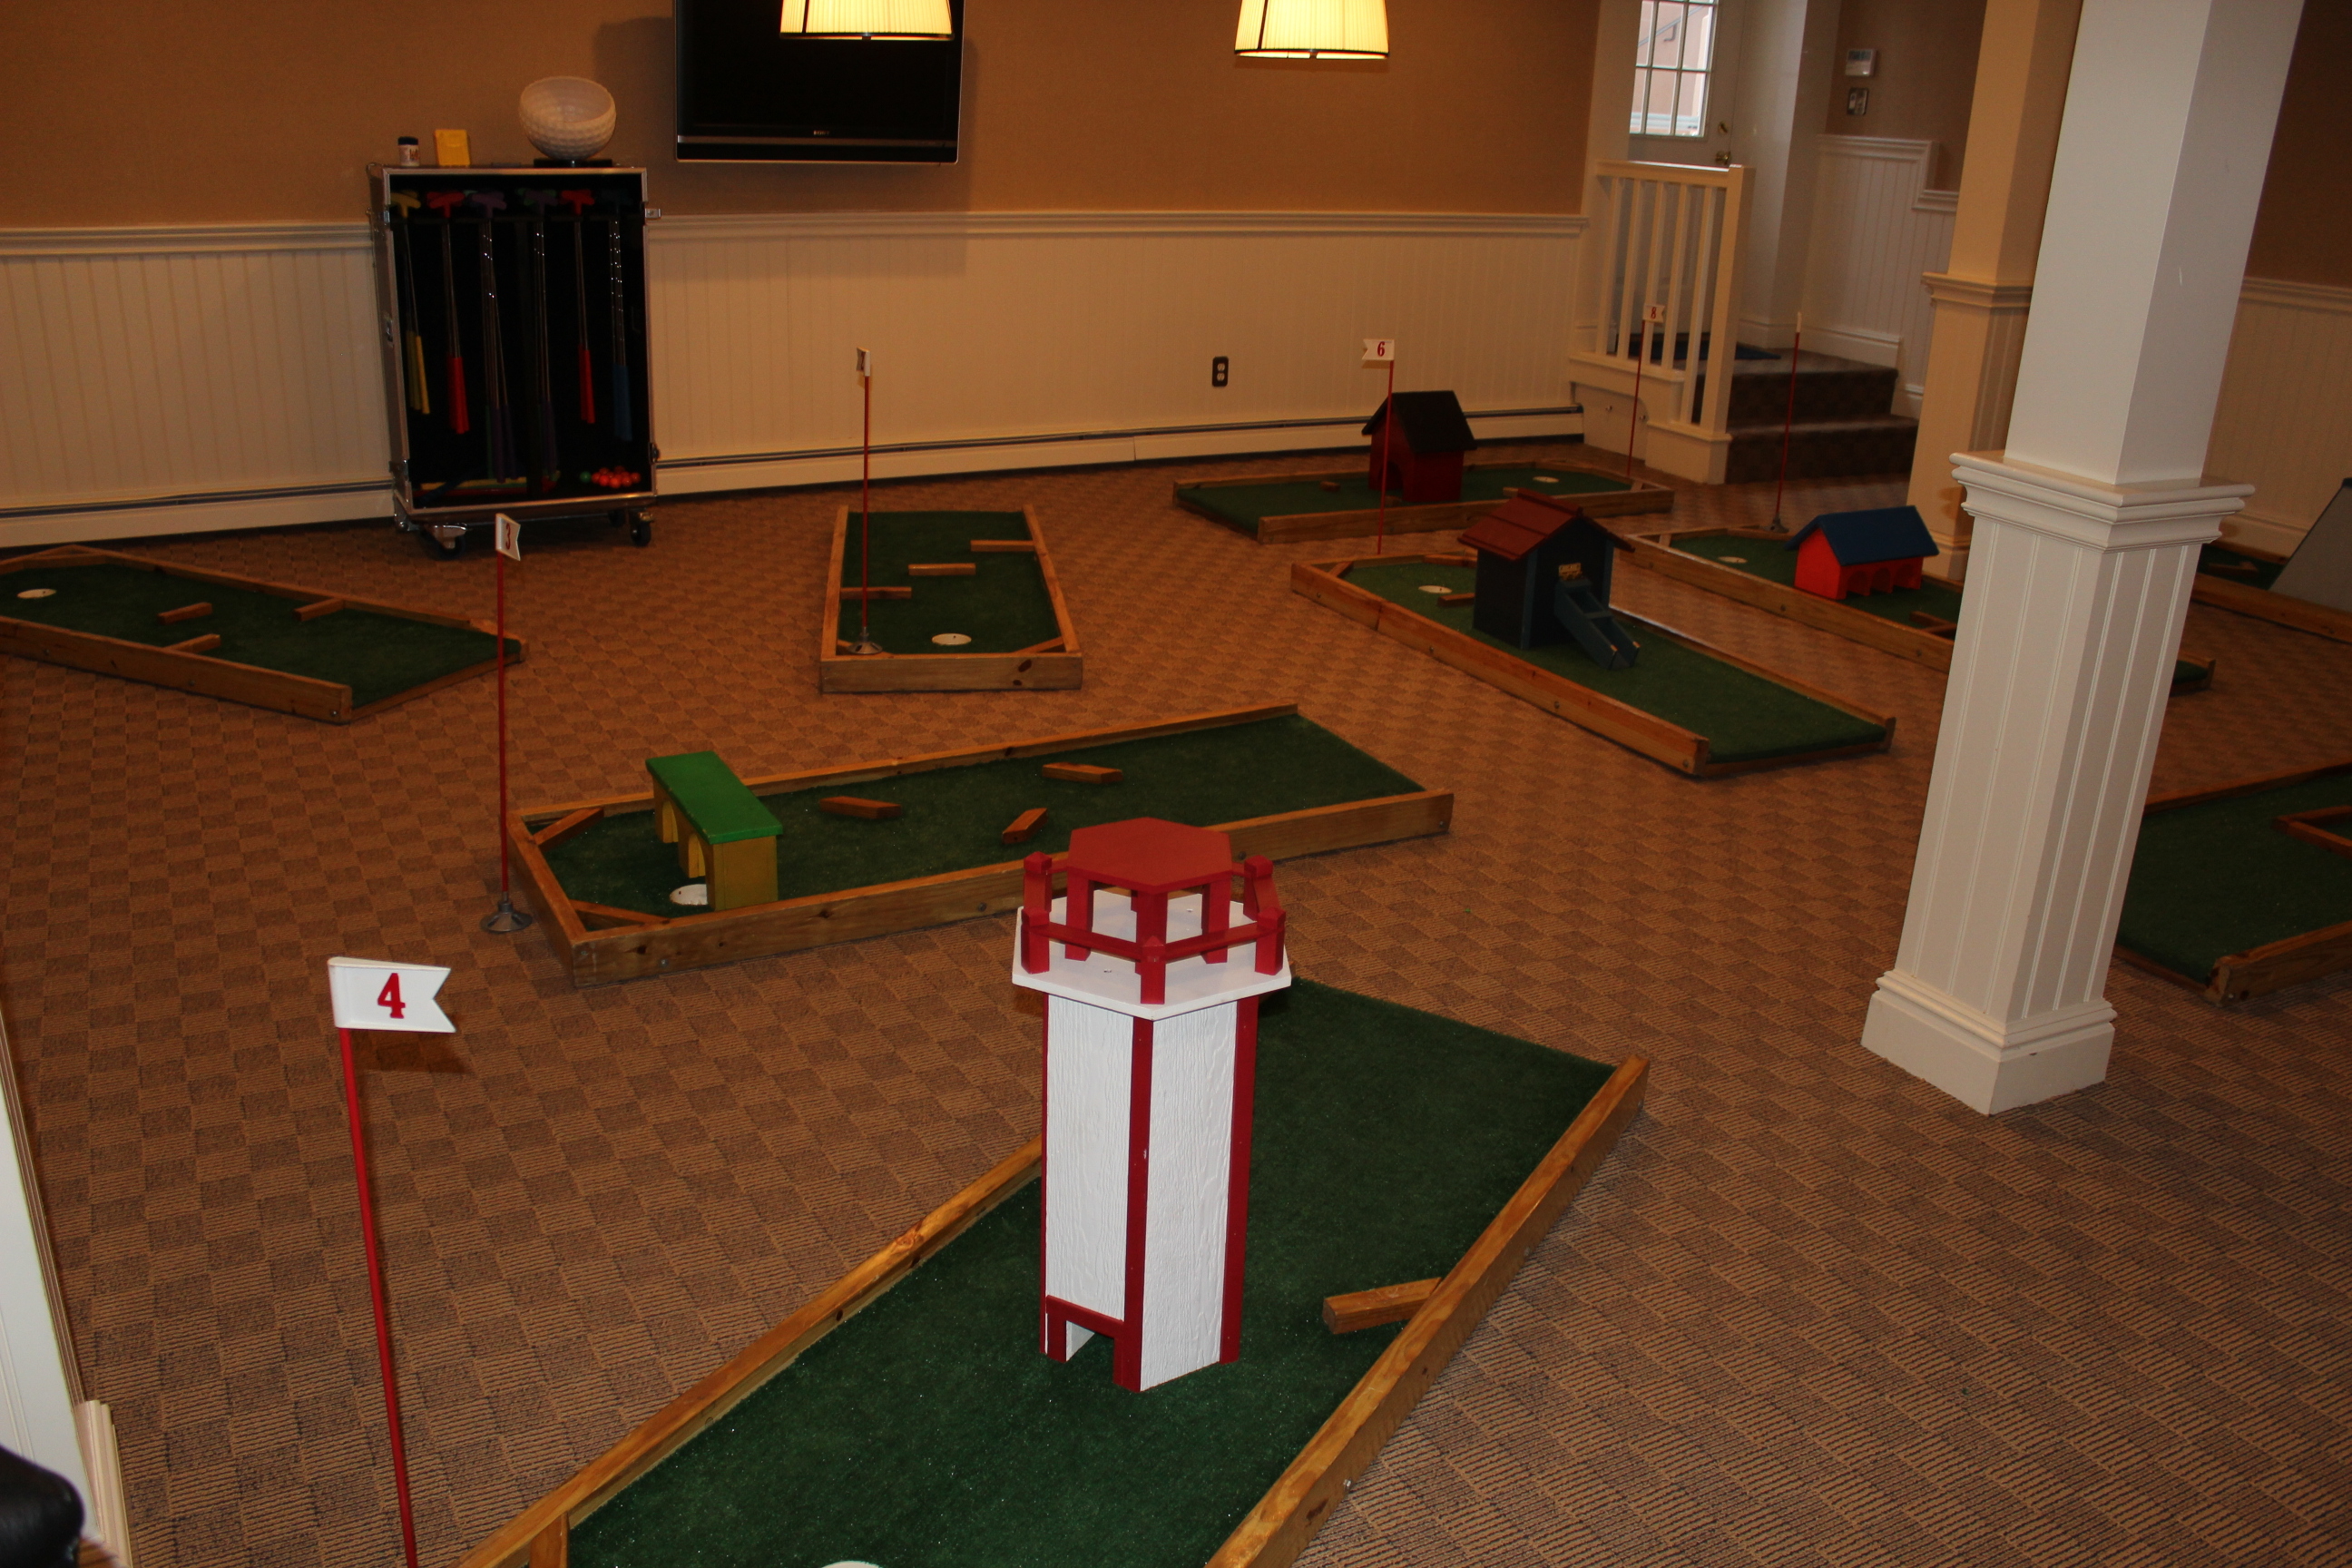 Mini Golf party rentals. We have the perfect mini golf course rental Long Island. Jump and Slide delivers backyard mini golf rentals across Long Island. Mini golf rental comes with score cards, golf clubs, pencils, and golf balls. Kids would love to have mini golf  course at their birthday party. Kids and adults will play on the golf course and try to sink the golf ball by avoiding the obstacles on this course. We deliver to all of Long Island including East Hampton for that perfect party rental or bounce house rental